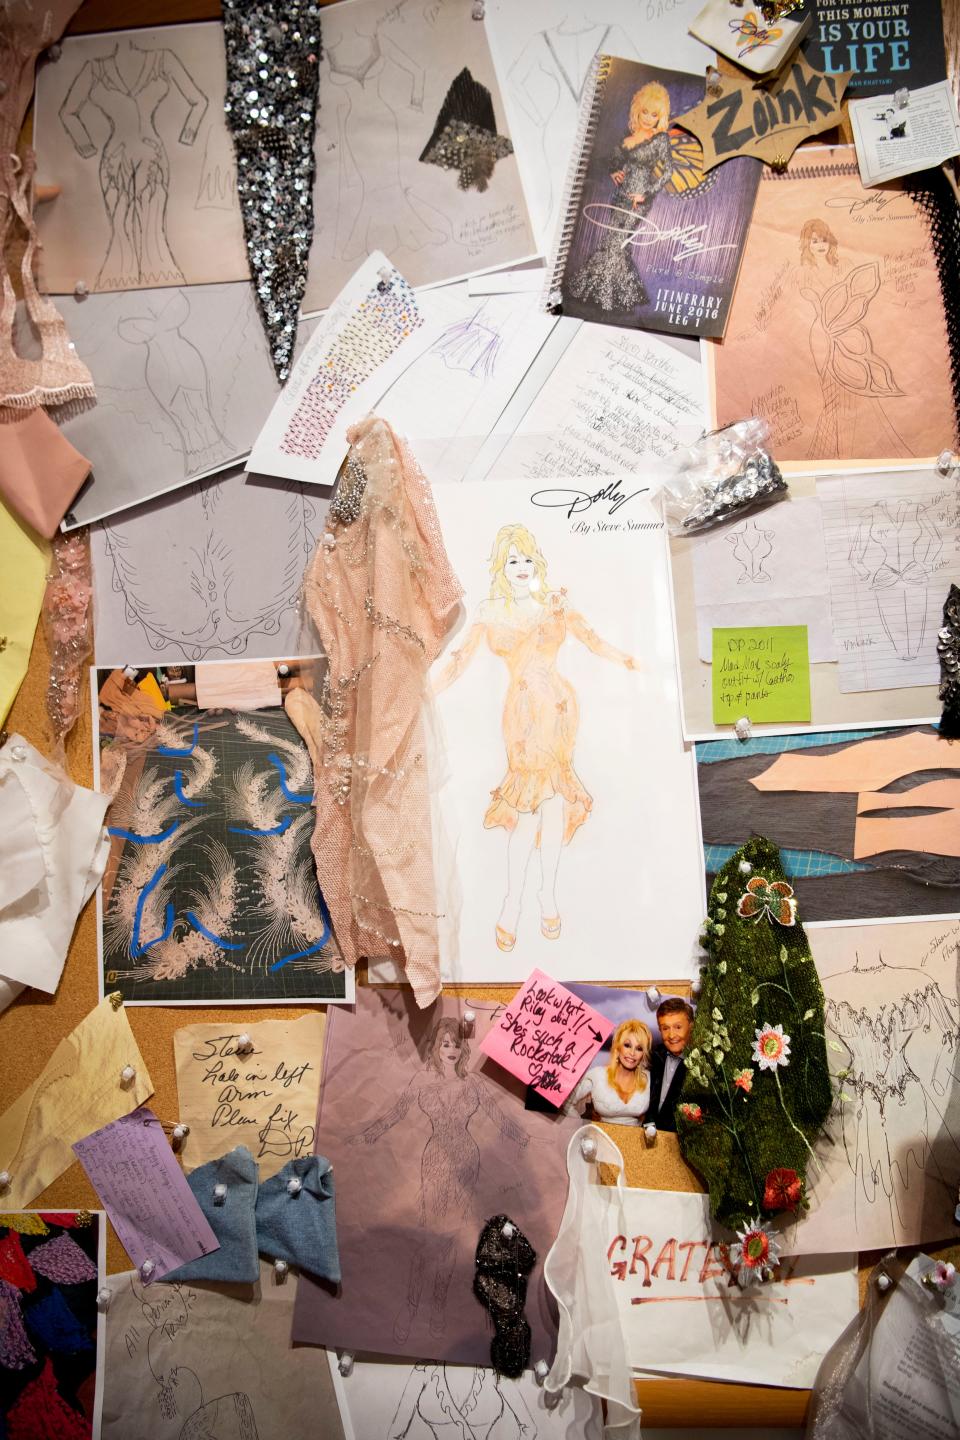 The wall near the work station display showing designs and sample material as part of Dolly Parton's wardrobe exhibition tied to her book "My Life In Seams"at Lipscomb University Beaman Library in Nashville, Tenn., Wednesday, Oct. 25, 2023.